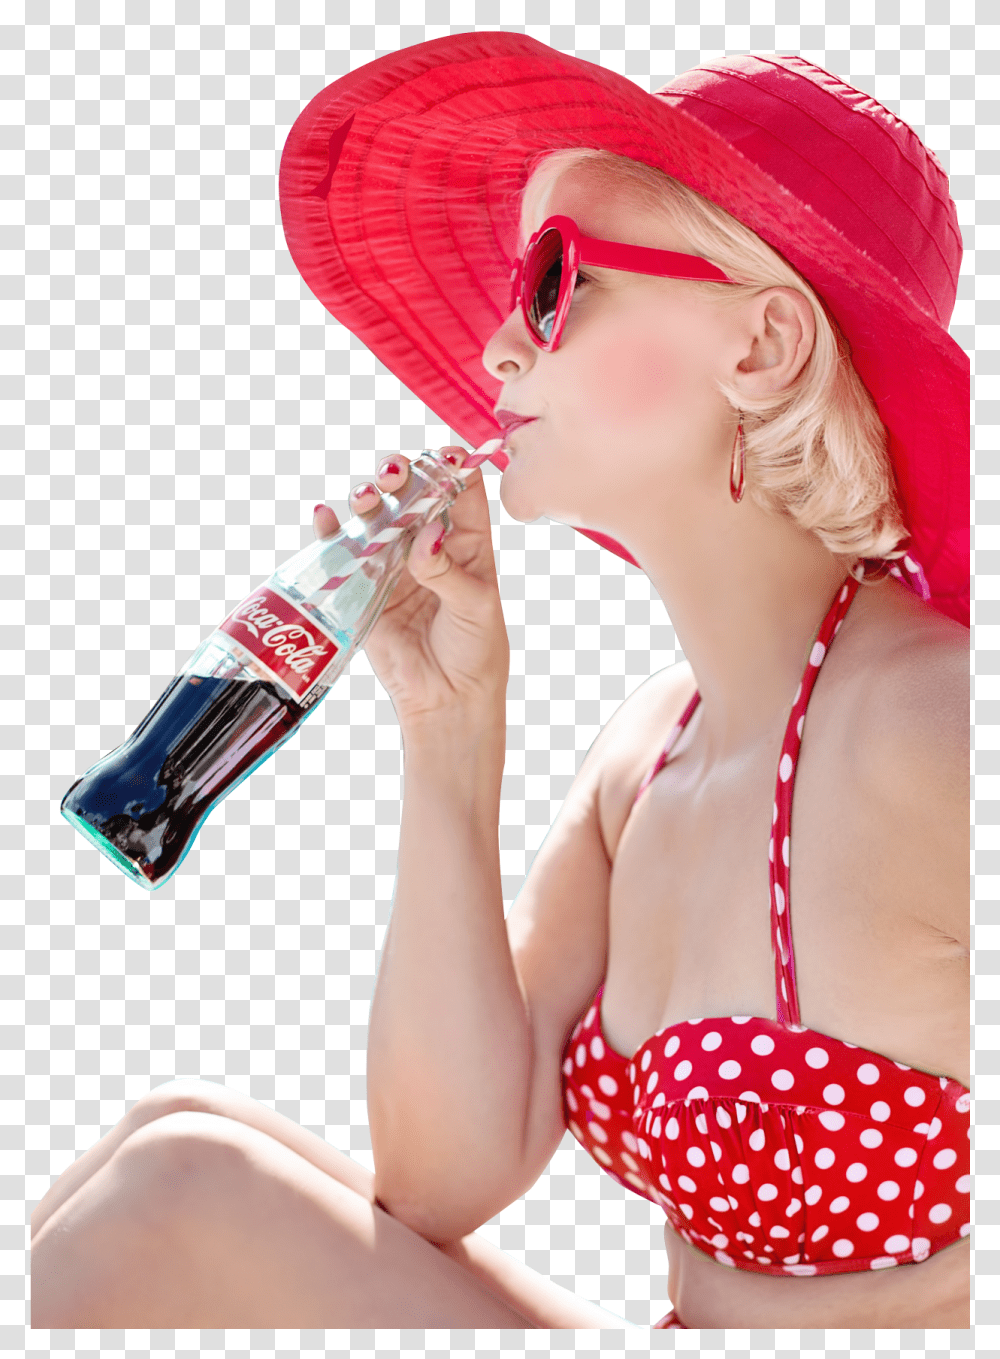 Sexy Woman Drinking Coca Cola Drink Image Coca Cola Drinking, Apparel, Sunglasses, Accessories Transparent Png